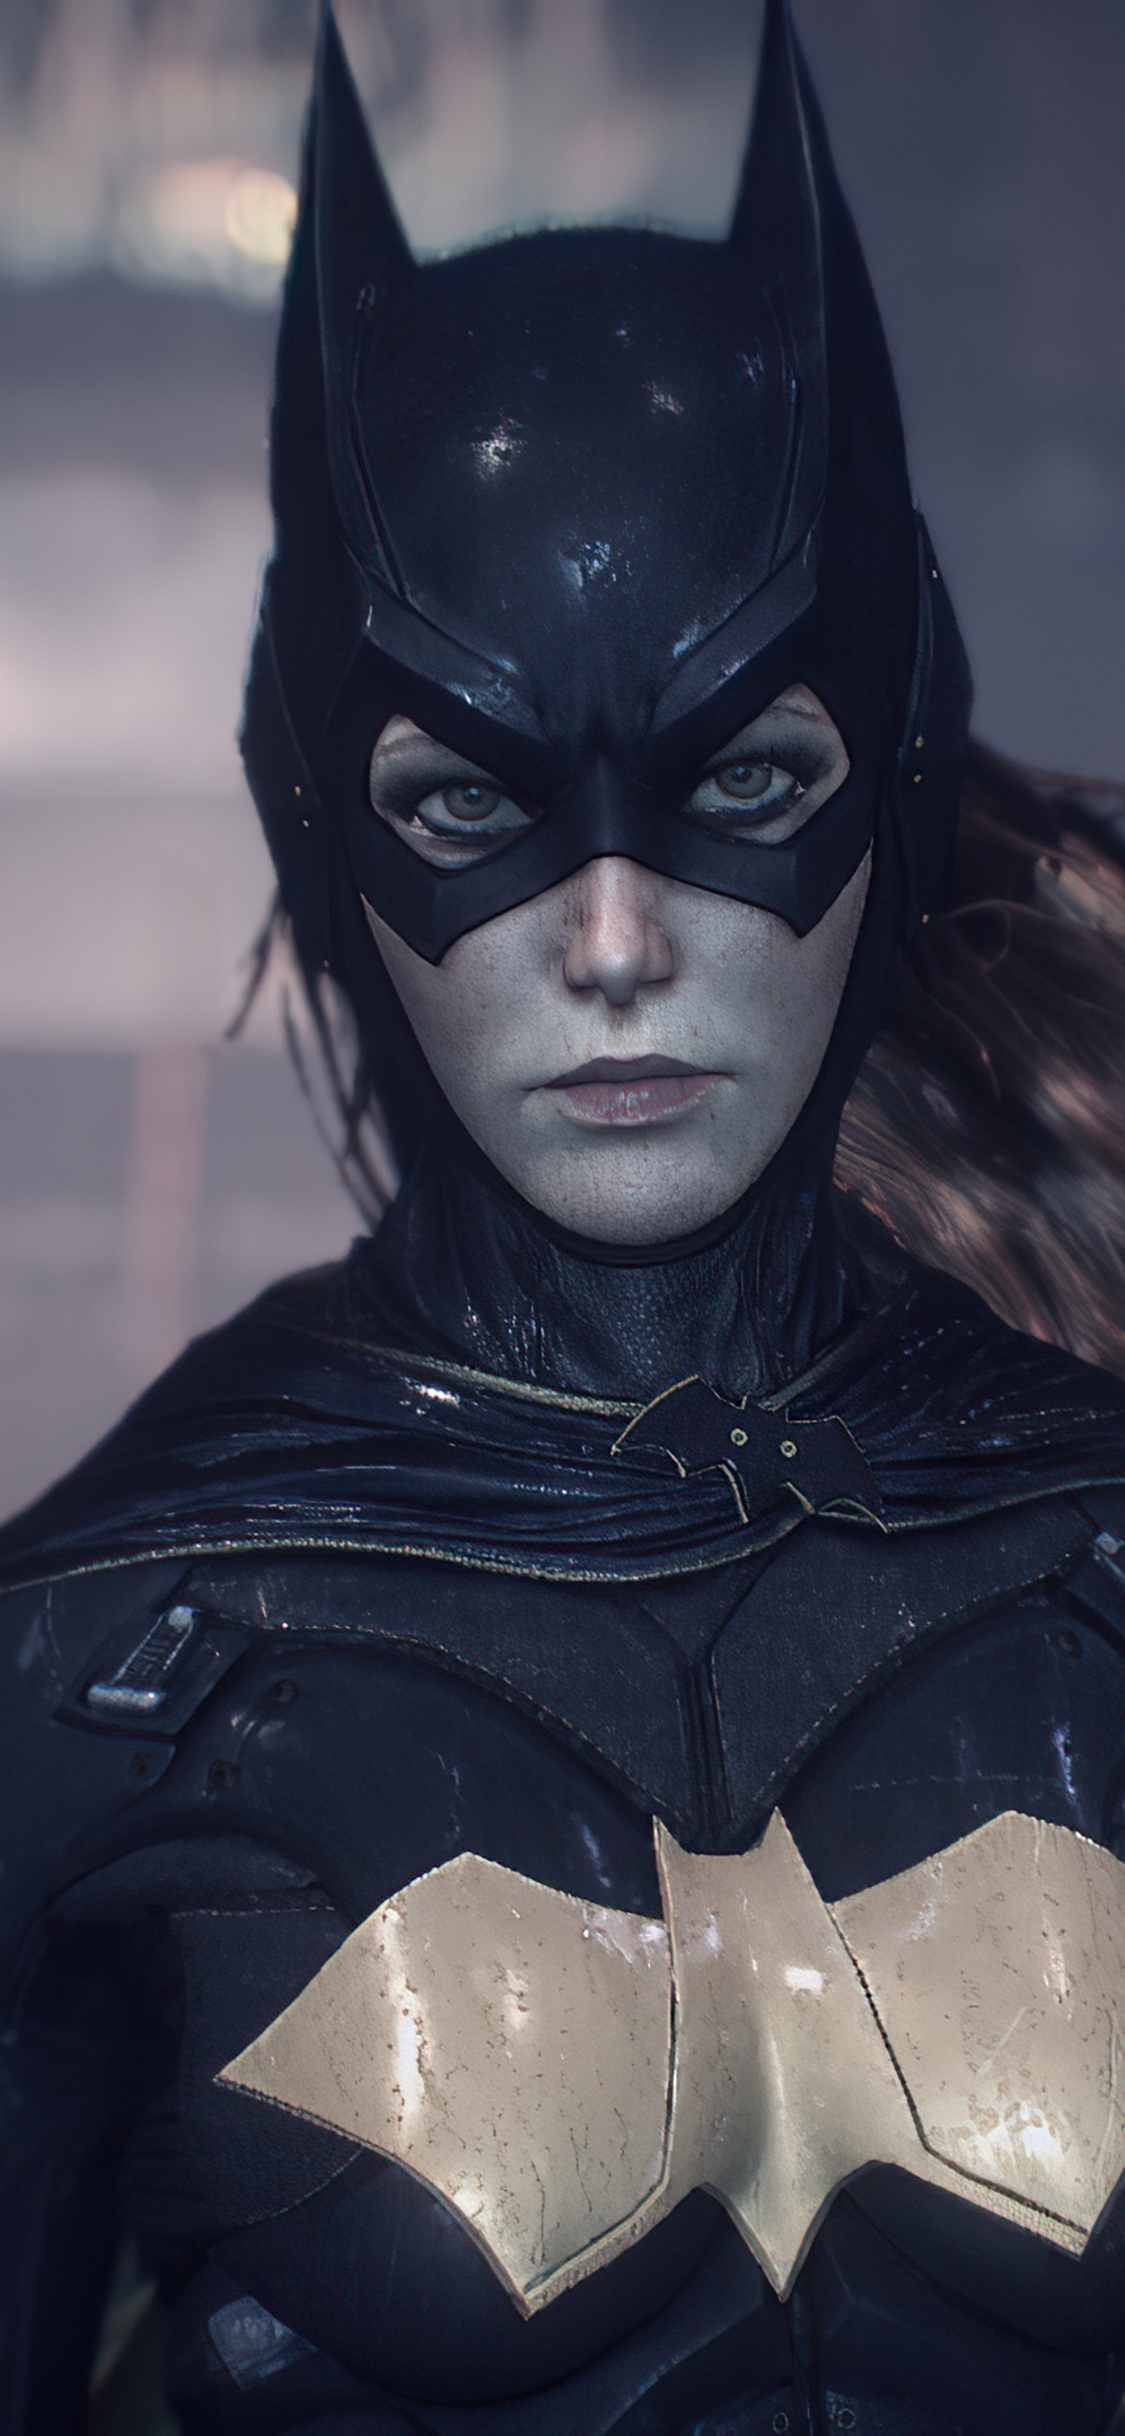 Batgirl From Batman Arkham Knight 4k iPhone XS, iPhone iPhone X HD 4k Wallpaper, Image, Background, Photo and Picture